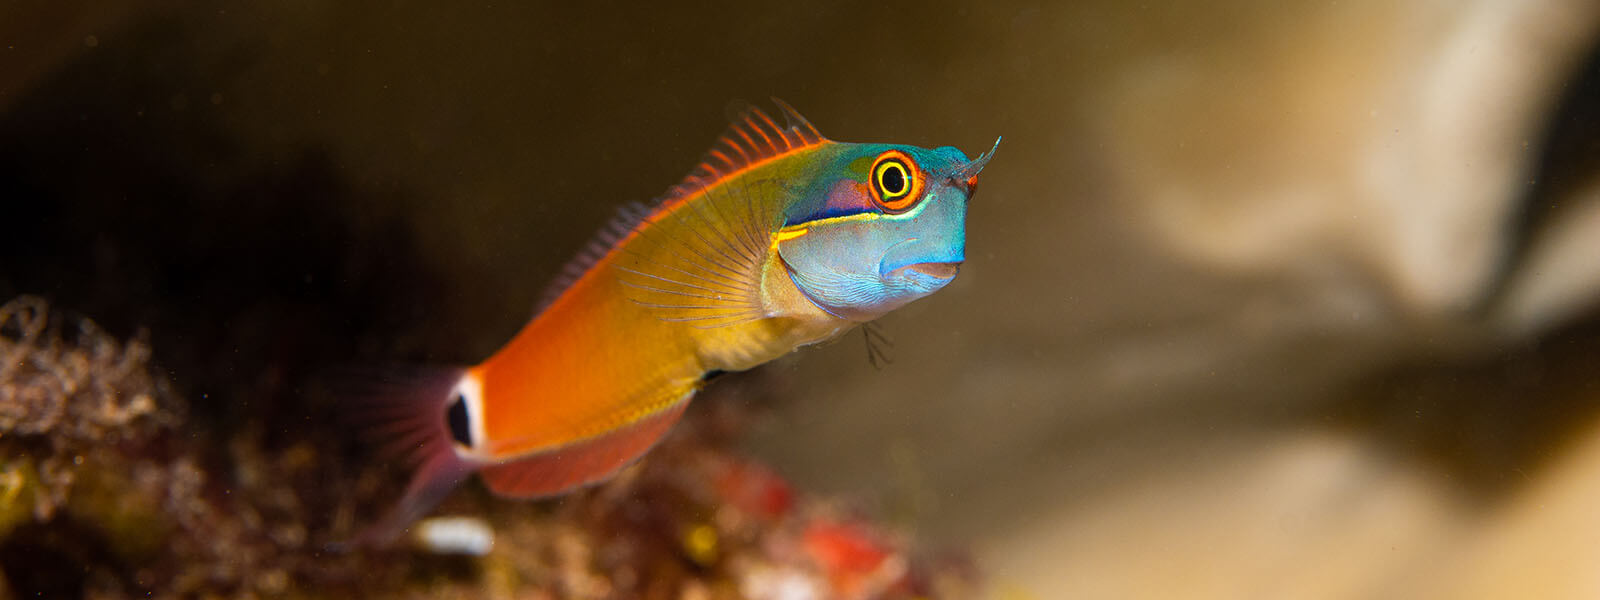 Spot tail blenny is a common fish we see snorkeling in Raja Ampat